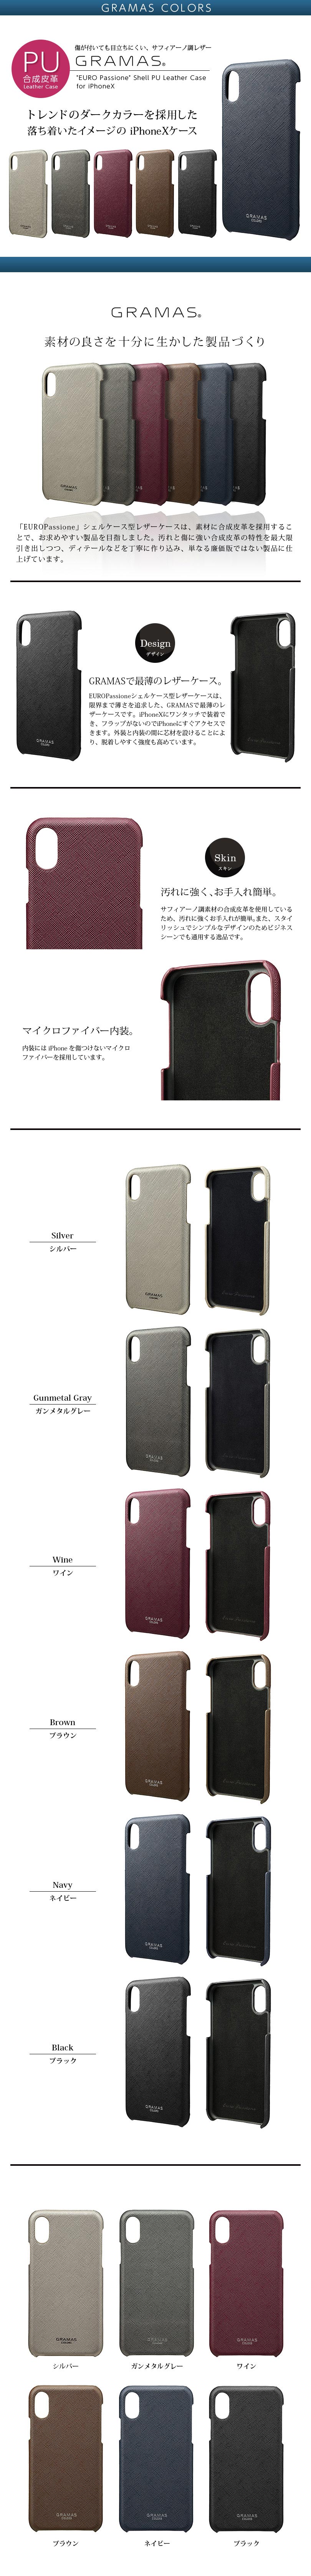 GRAMAS COLORS EURO Passione Shell PU Leather Case CSC60327』 iPhone XS ケース / iPhone  X ケース サフィアーノ調 レザー レザーケース